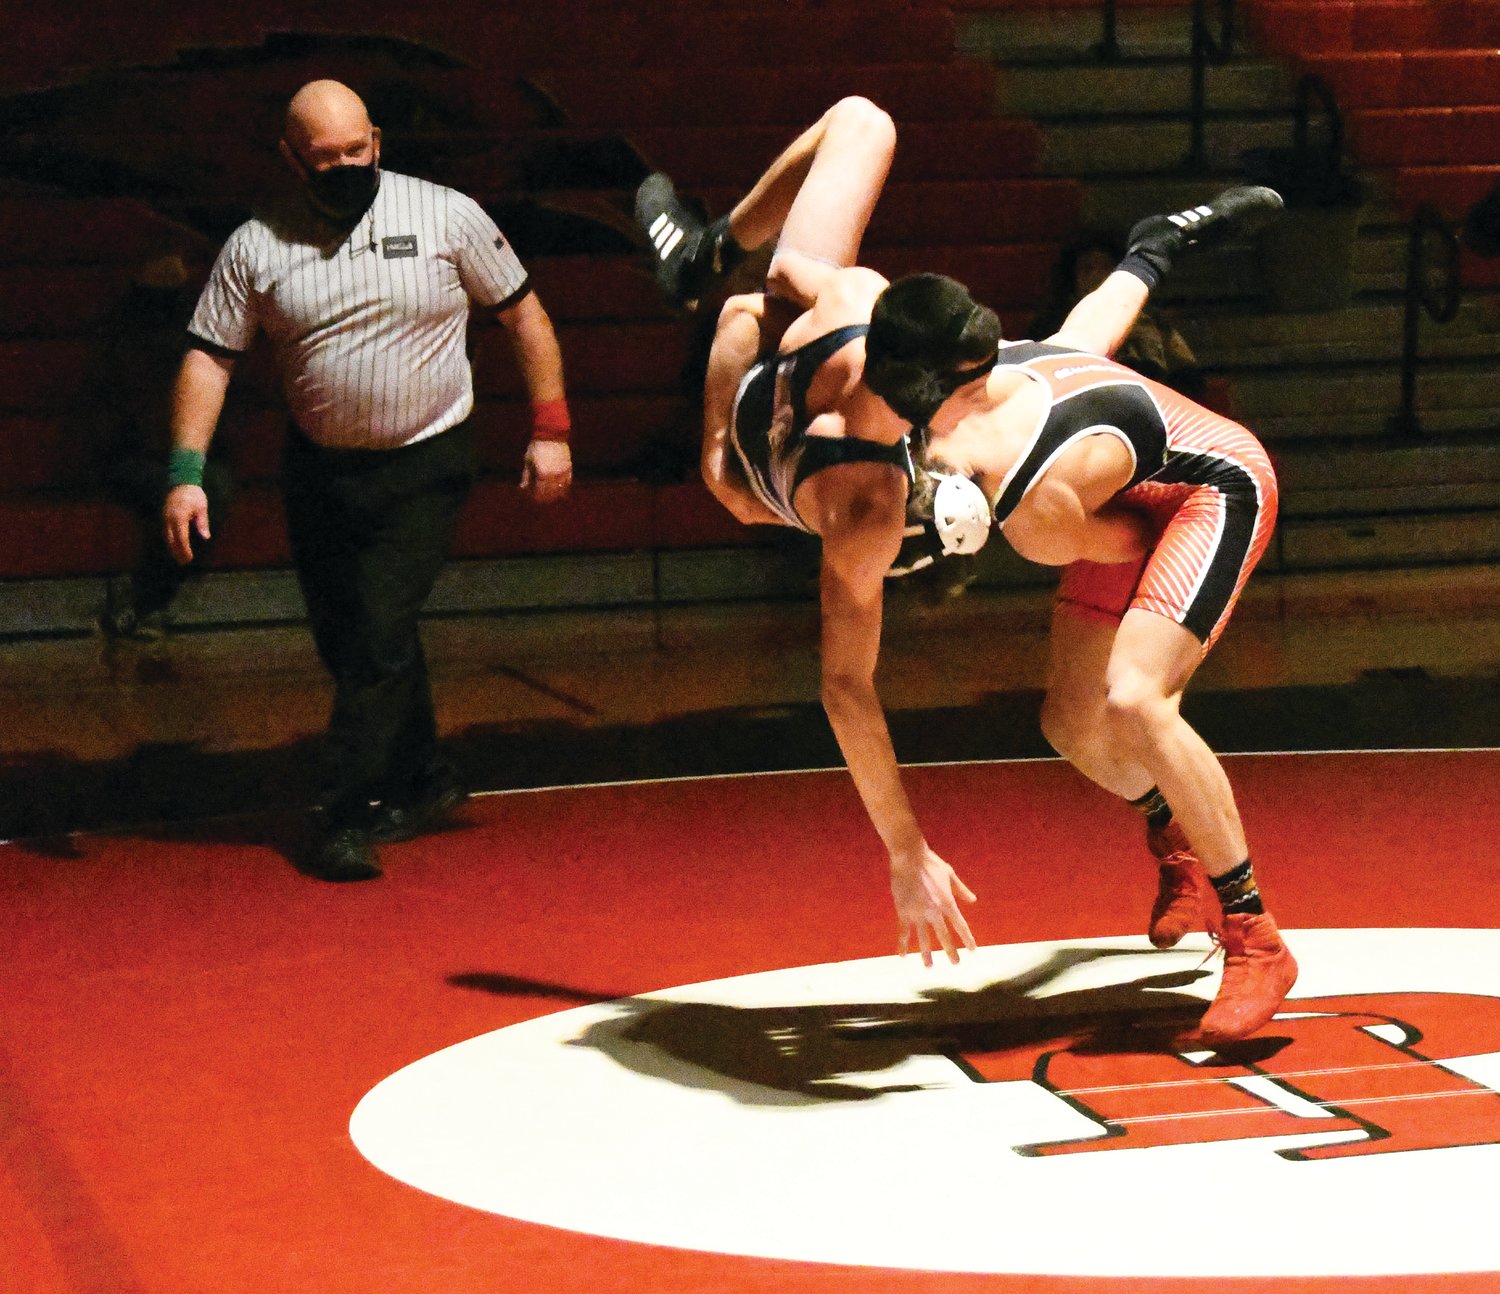 Logan Massie slams his opponent to the mat in the first period. Massie later won the match by fall.